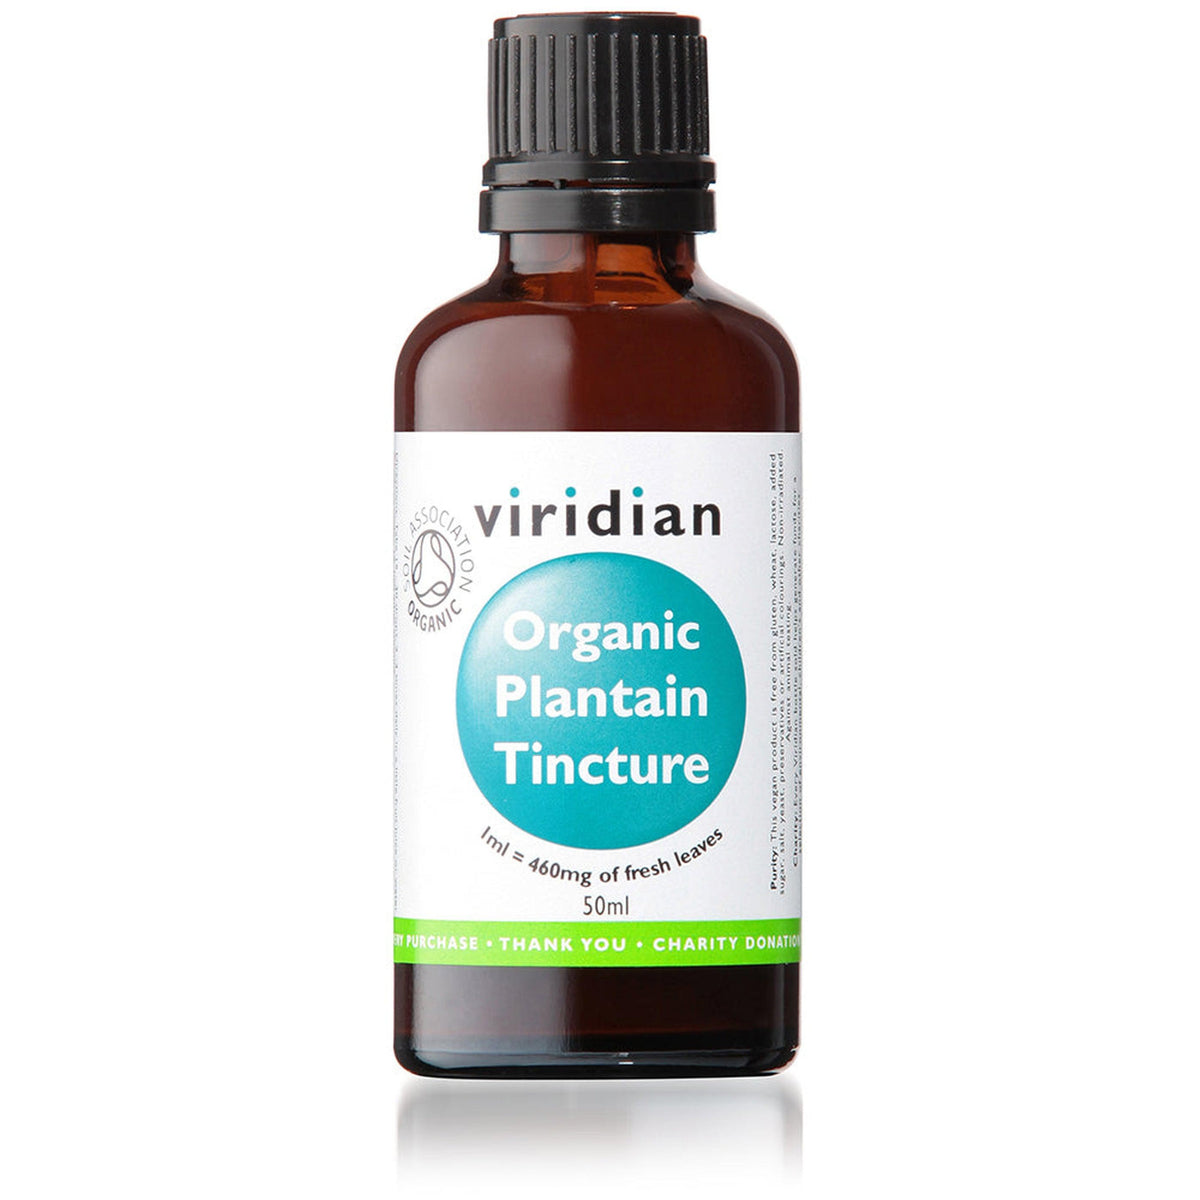 Viridian Organic Plantain Tincture 50ml- Lillys Pharmacy and Health Store